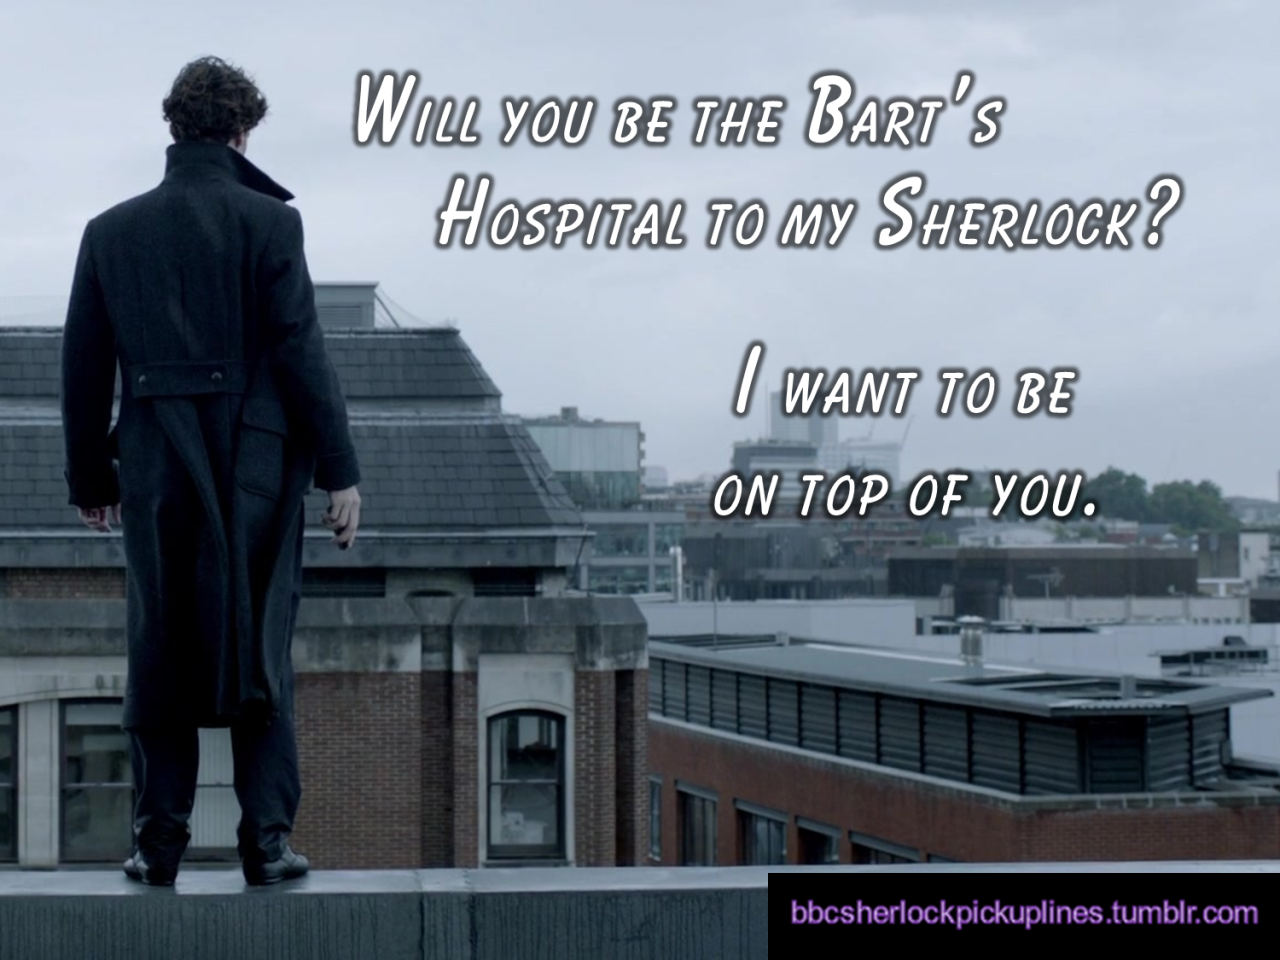 â€œWill you be the Bartâ€™s Hospital to my Sherlock? I want to be on top